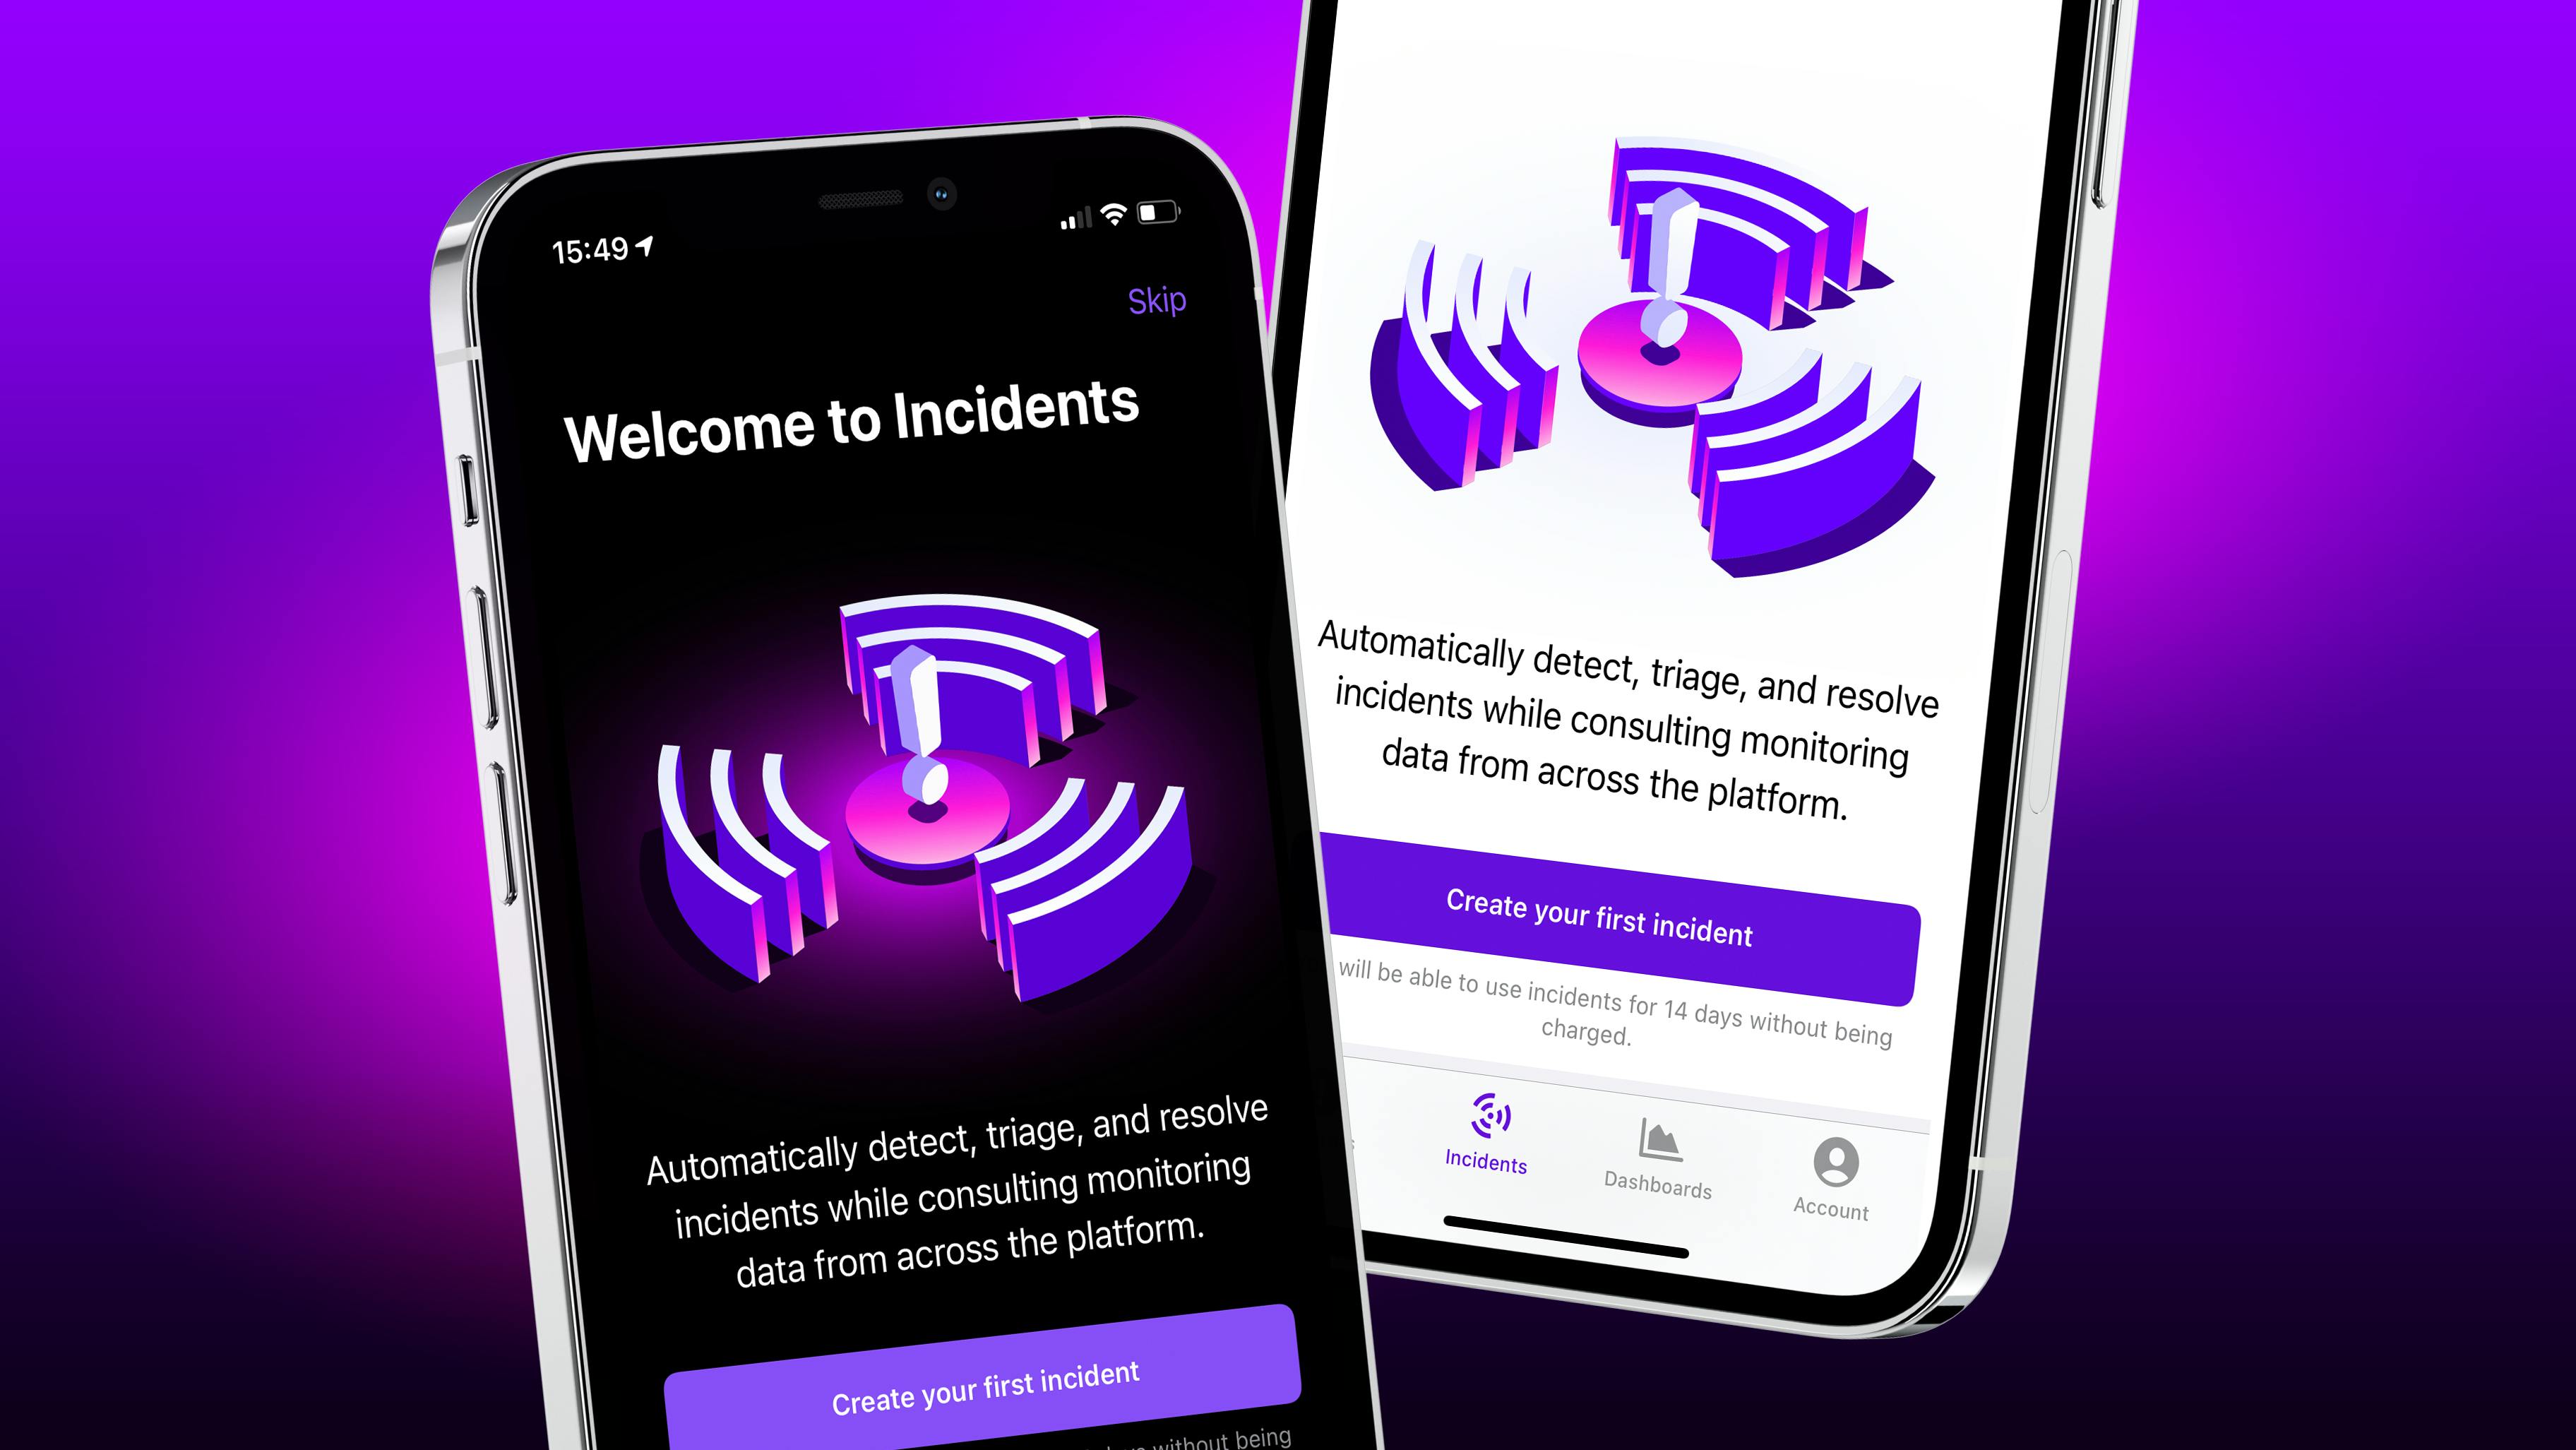 Two iphones layered on a purple and pink gradient background. Displayed on each phone screen is the Incident Management welcome screen- one in light mode, and the other in dark mode.